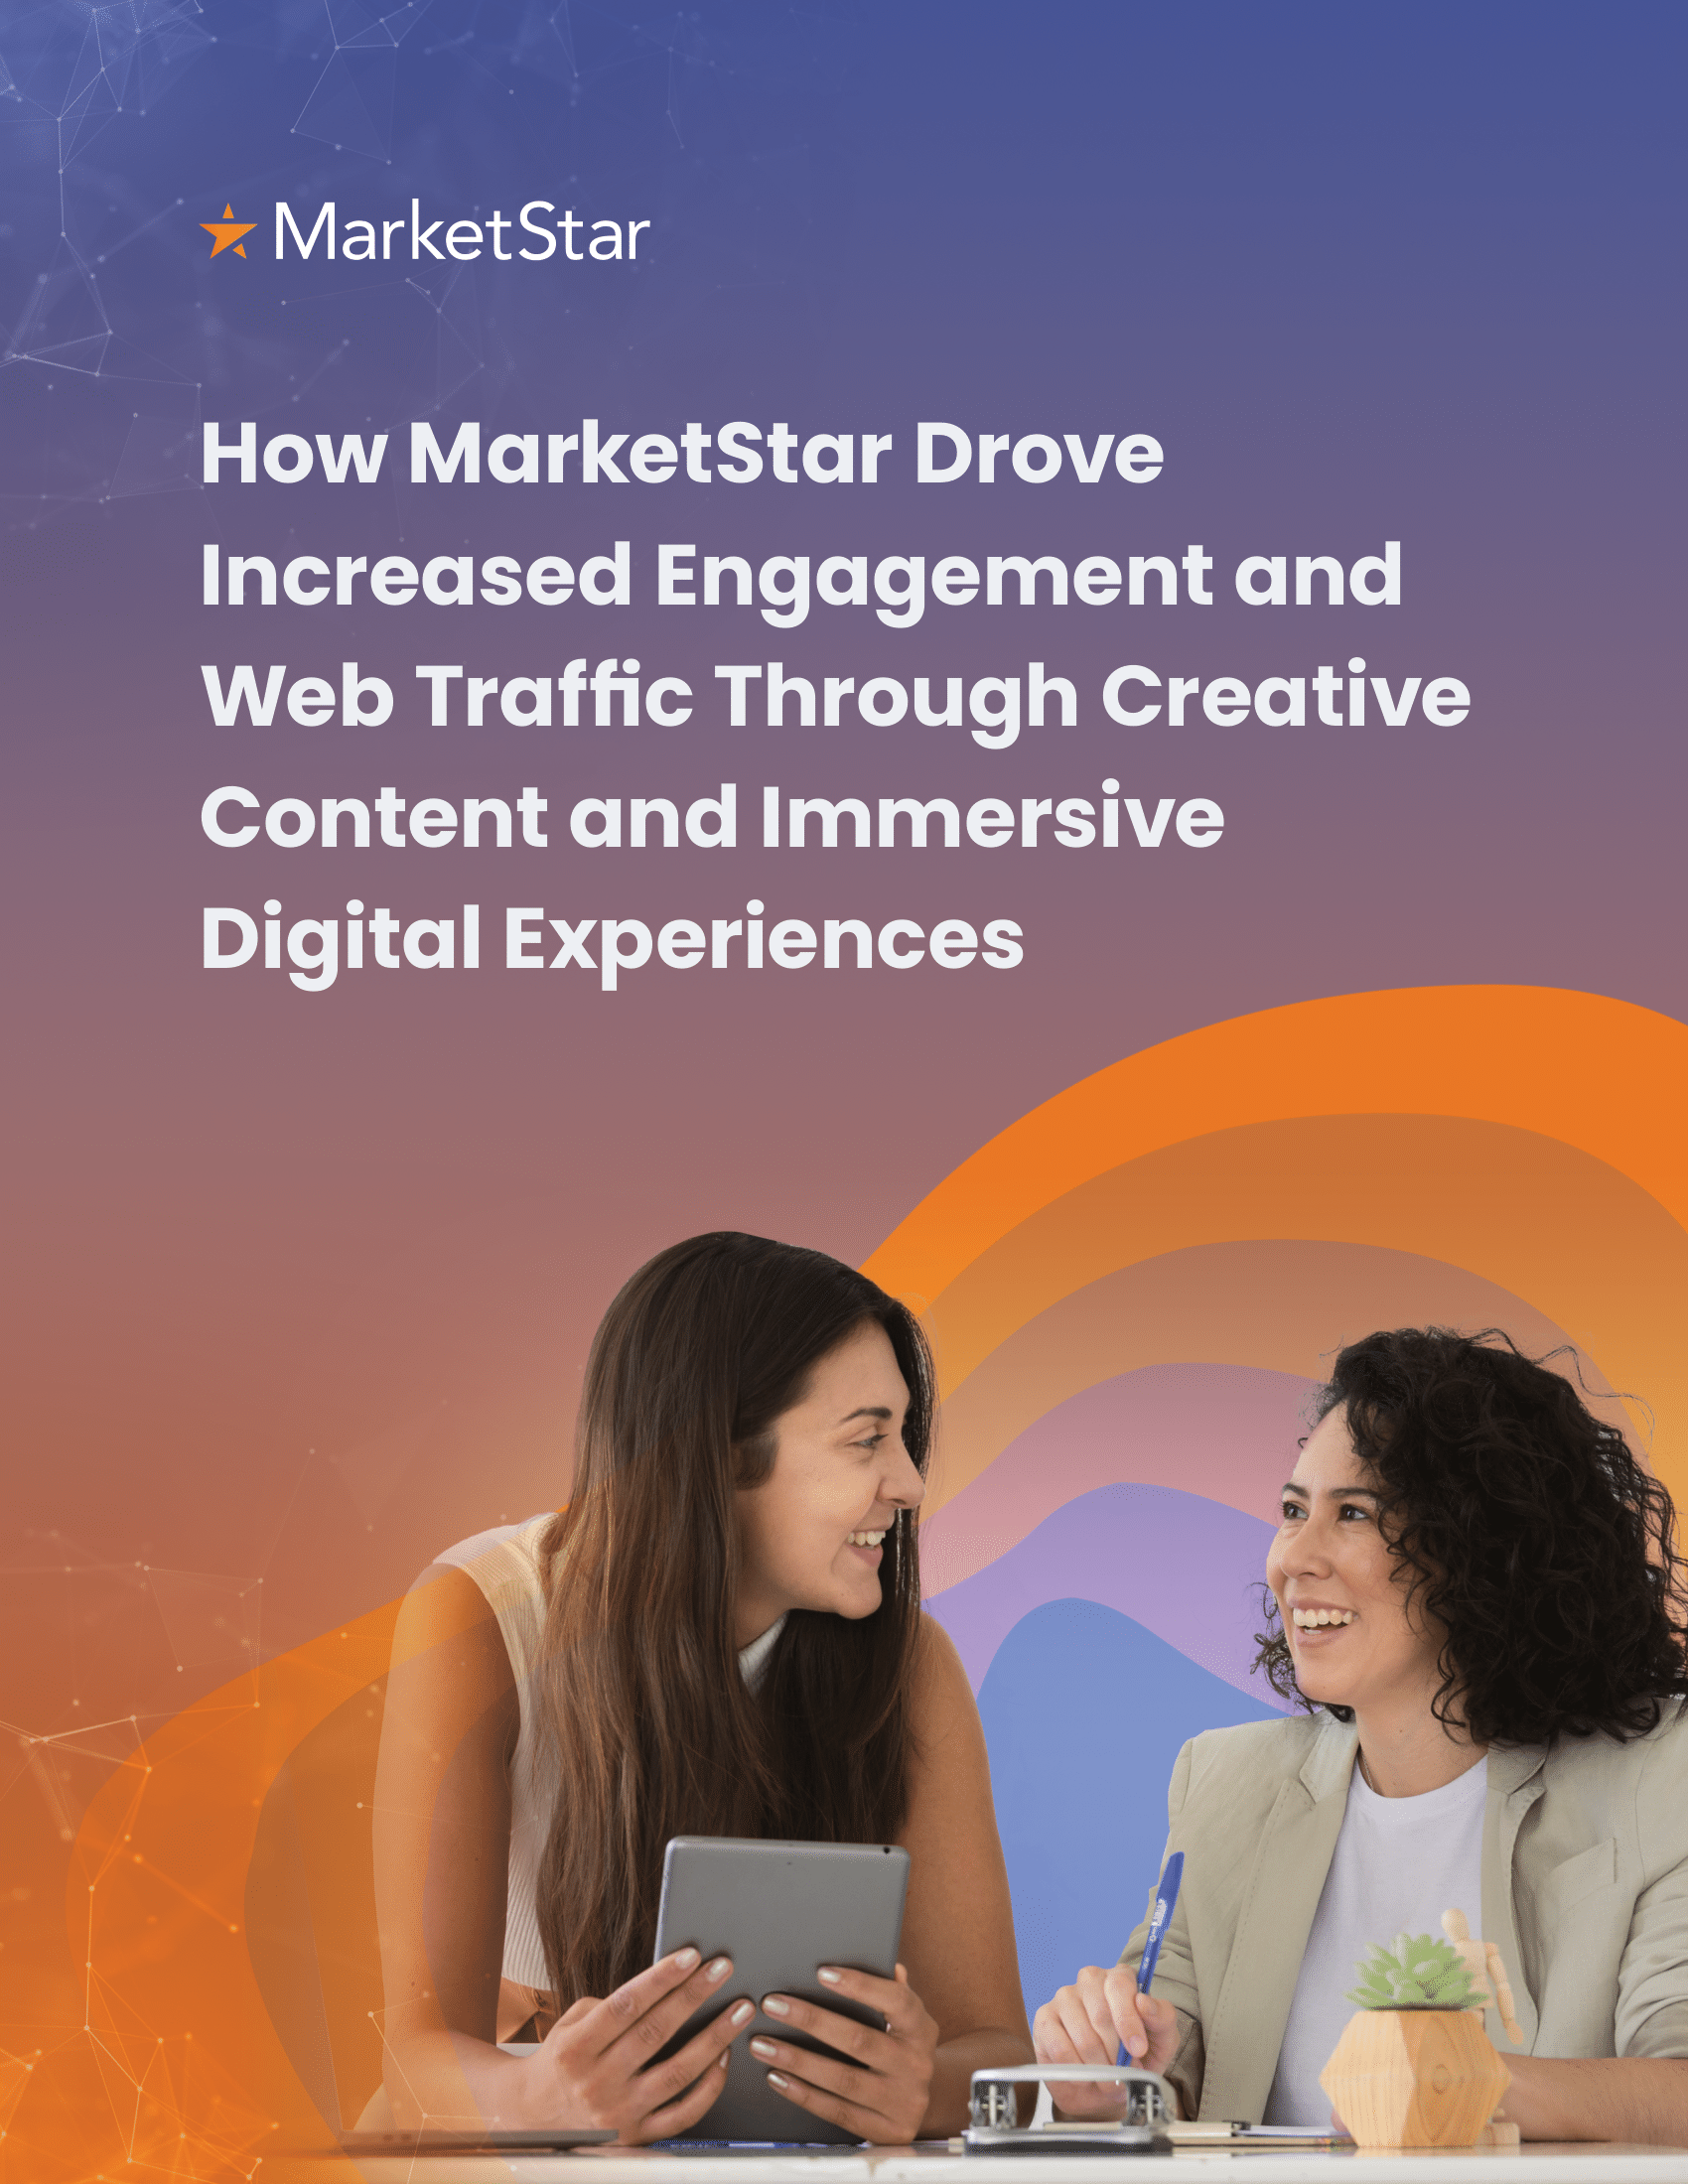 How MarketStar Drove Increased Engagement and Web Traffic Through Creative Content and Immersive Digital Experiences